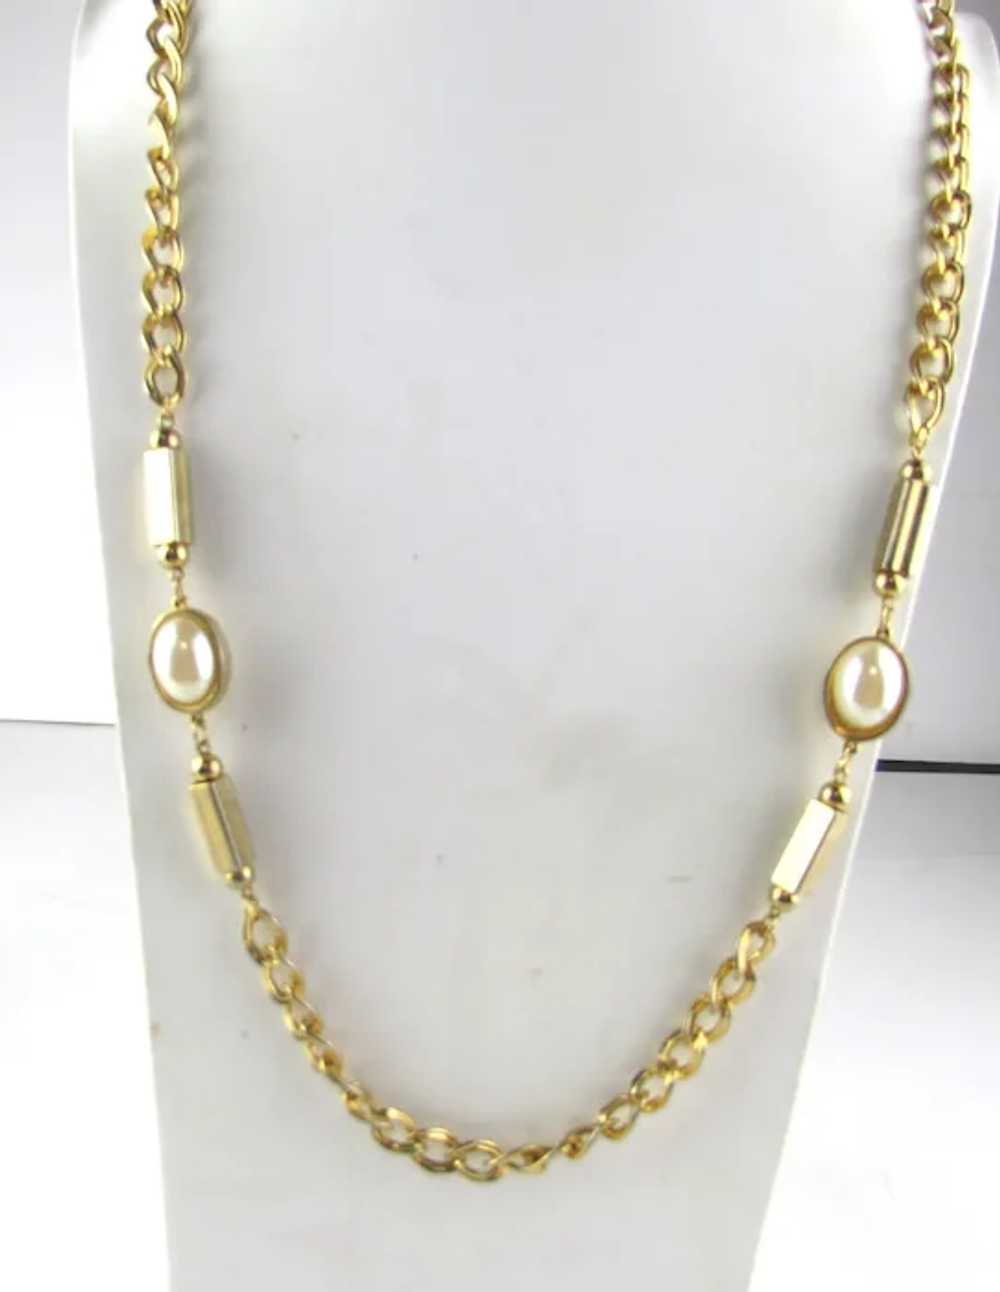 Gold Tone Heavy Chain With Faux Pearl Focals - image 8